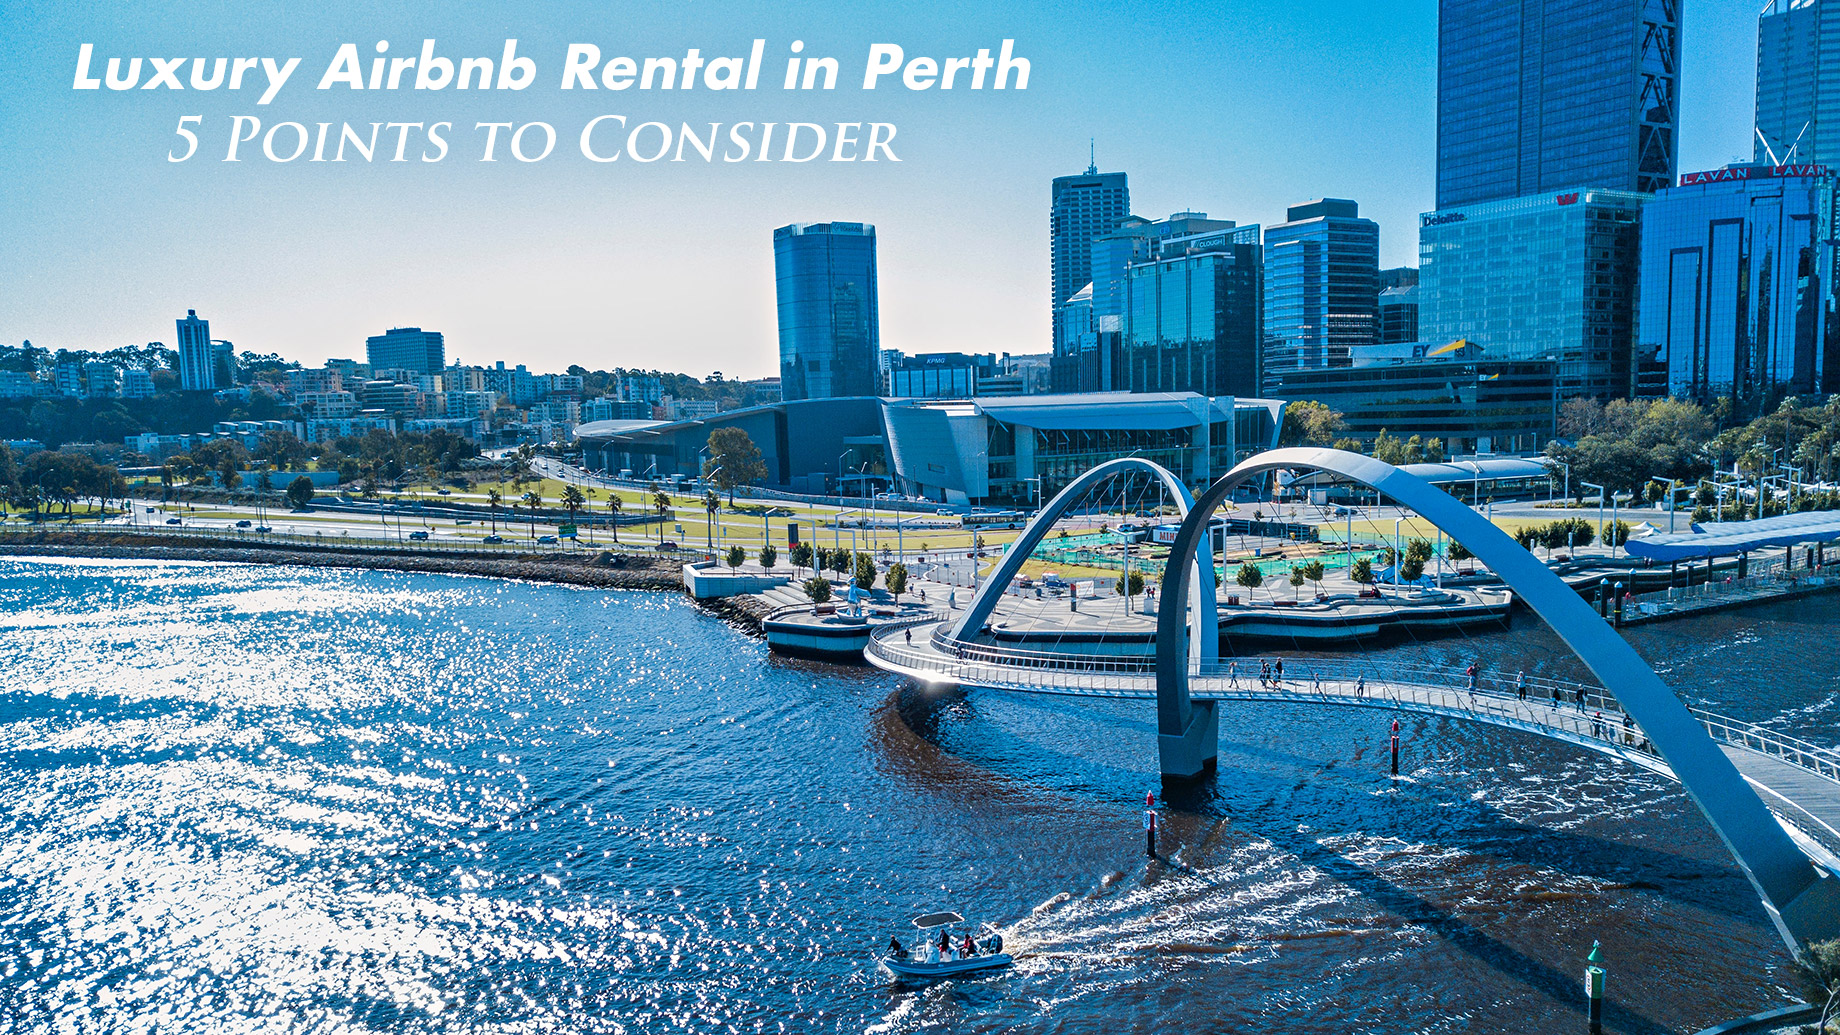 Luxury Airbnb Rental in Perth - 5 Points to Consider